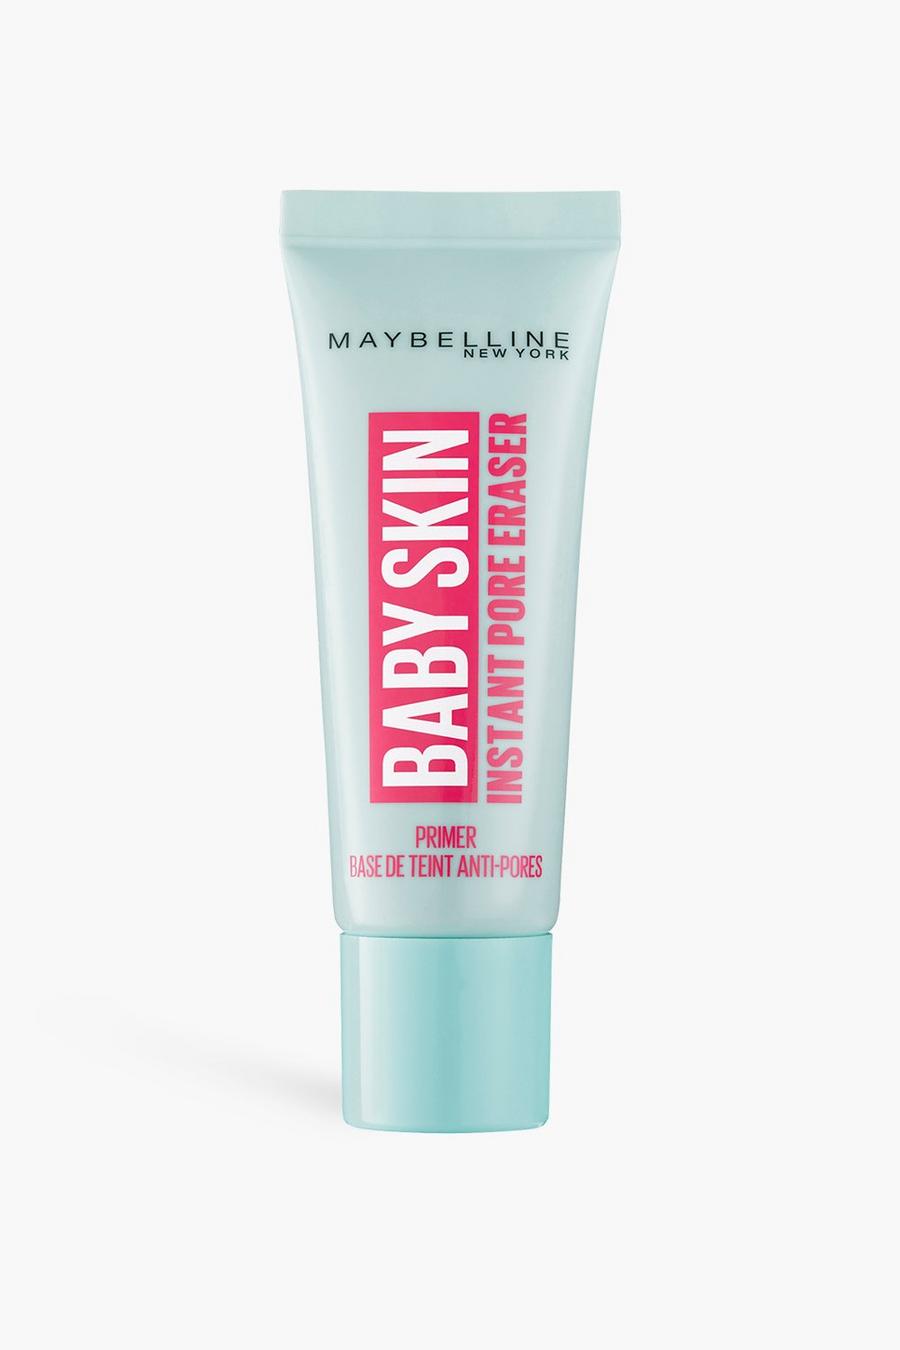 Maybelline - Base de teint anti pores - 22ml, Couleur chair image number 1